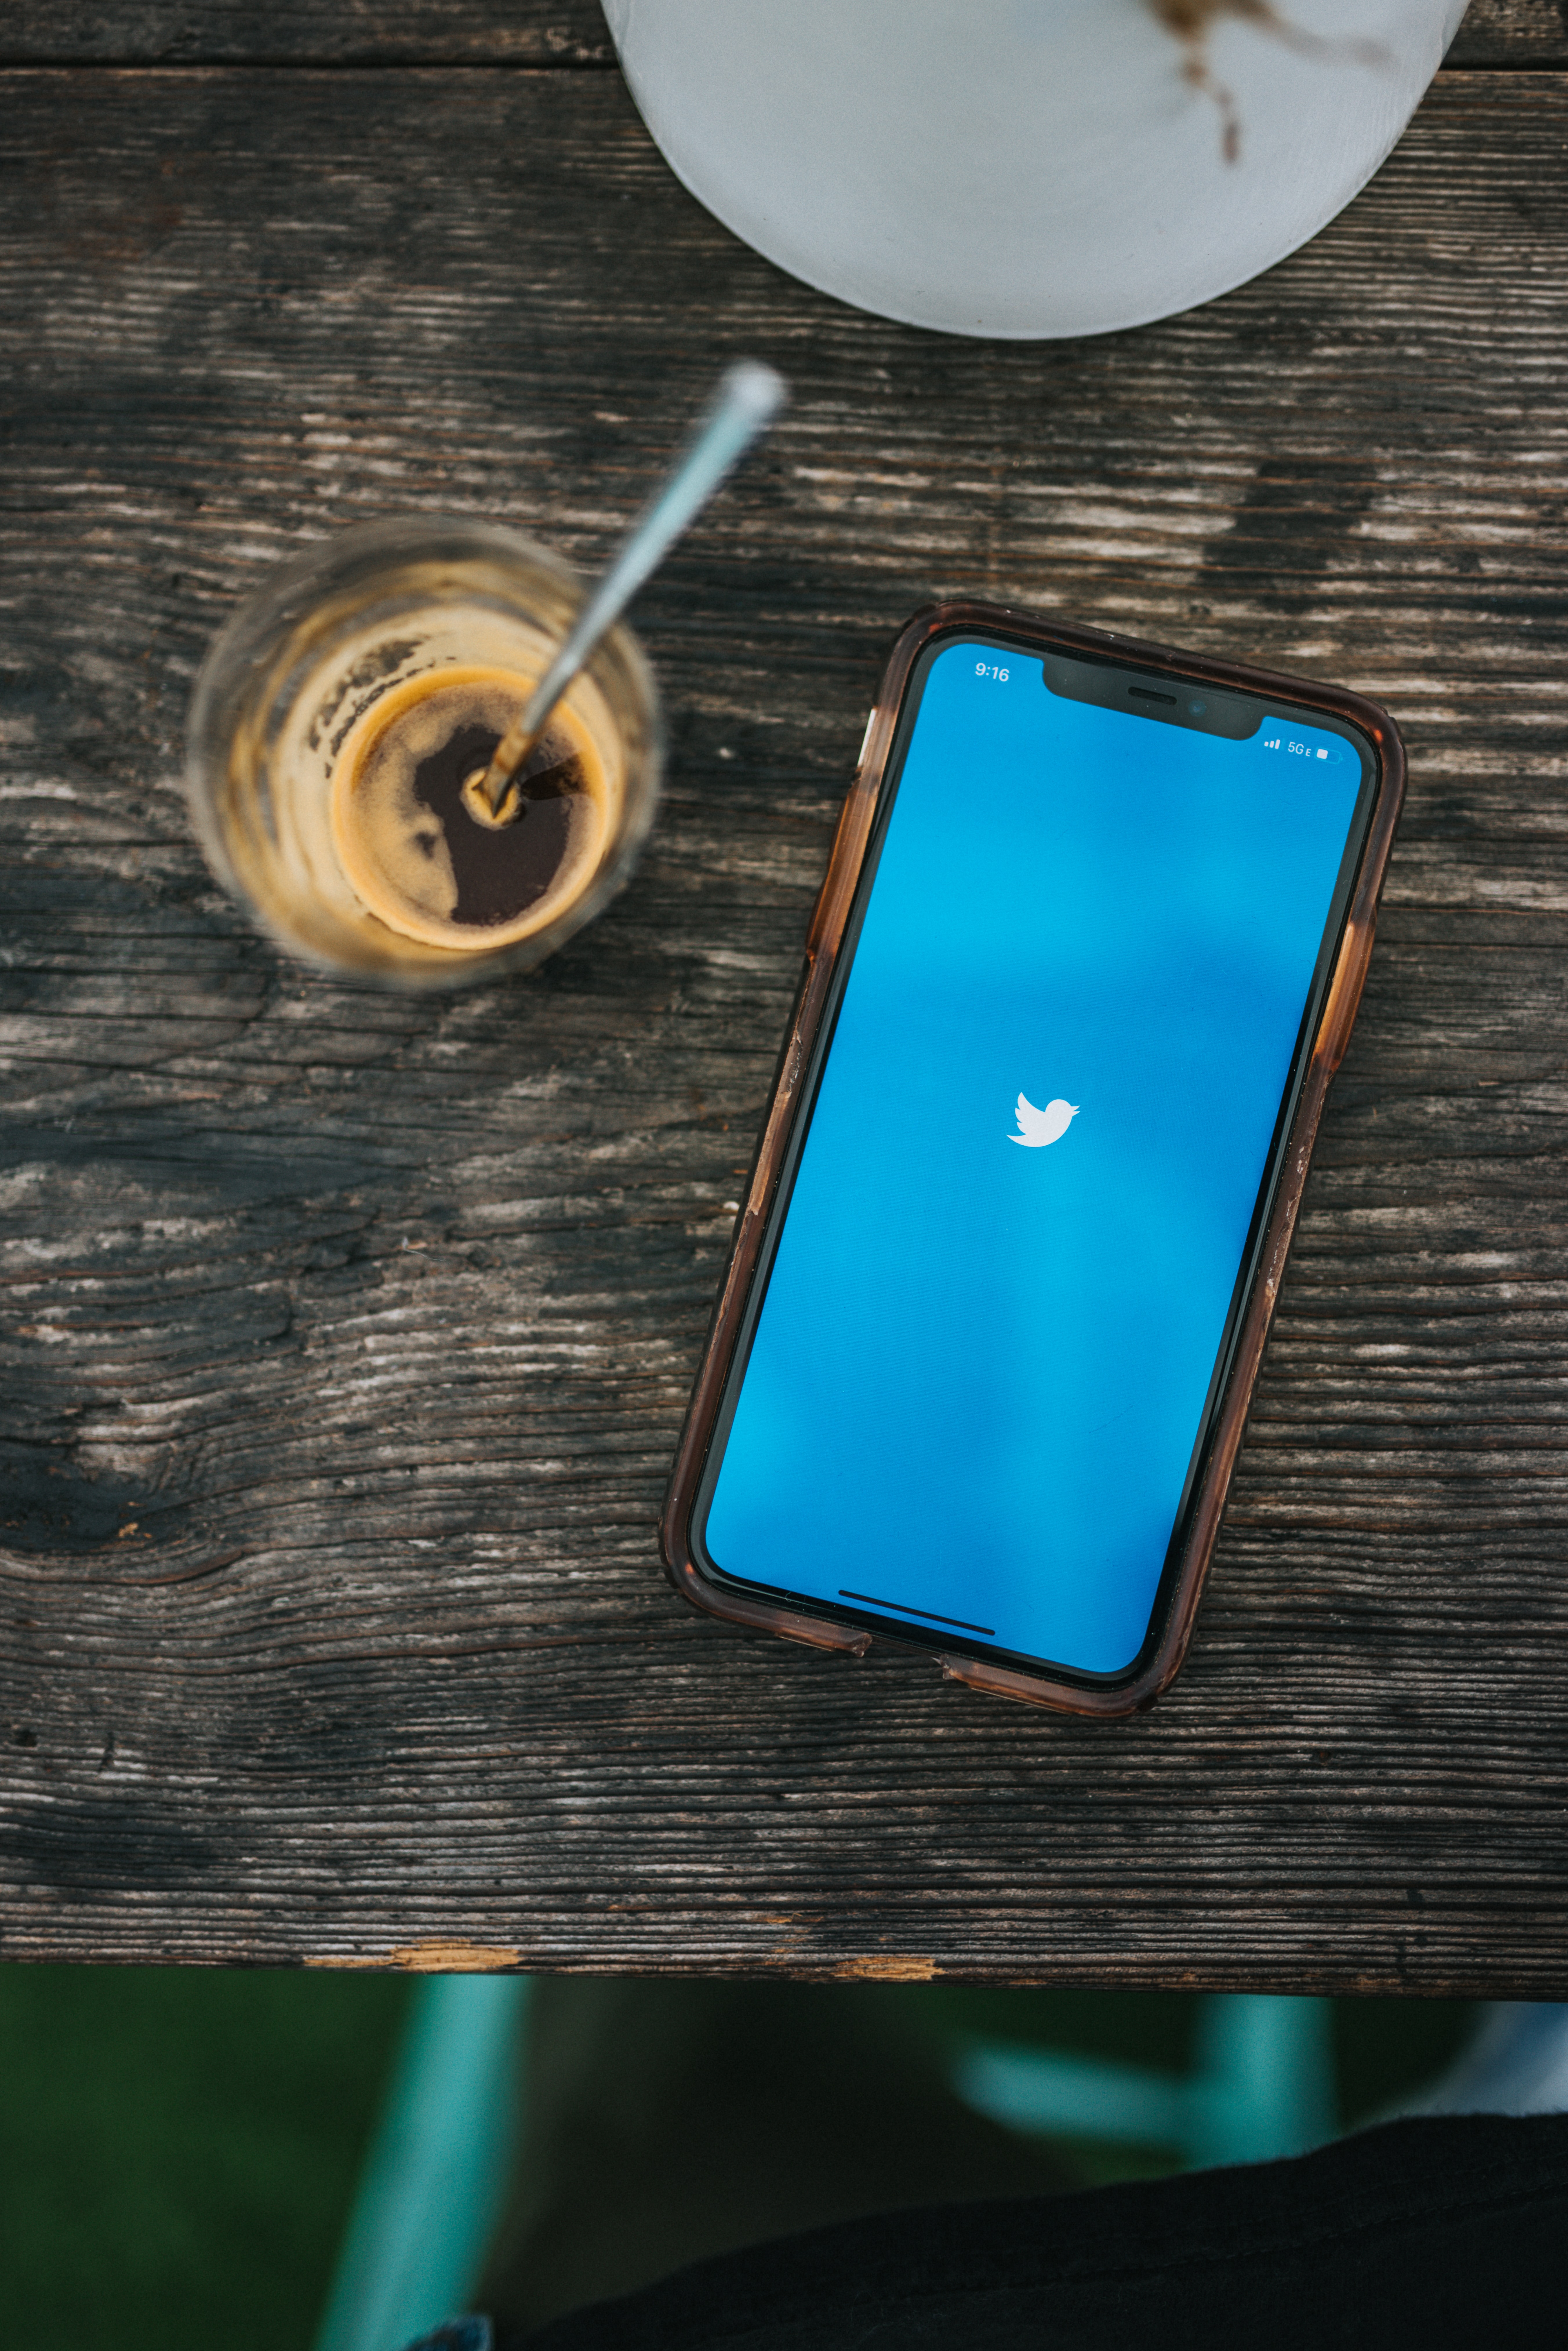 Twitter: The Social Media Platform That Changed the Game